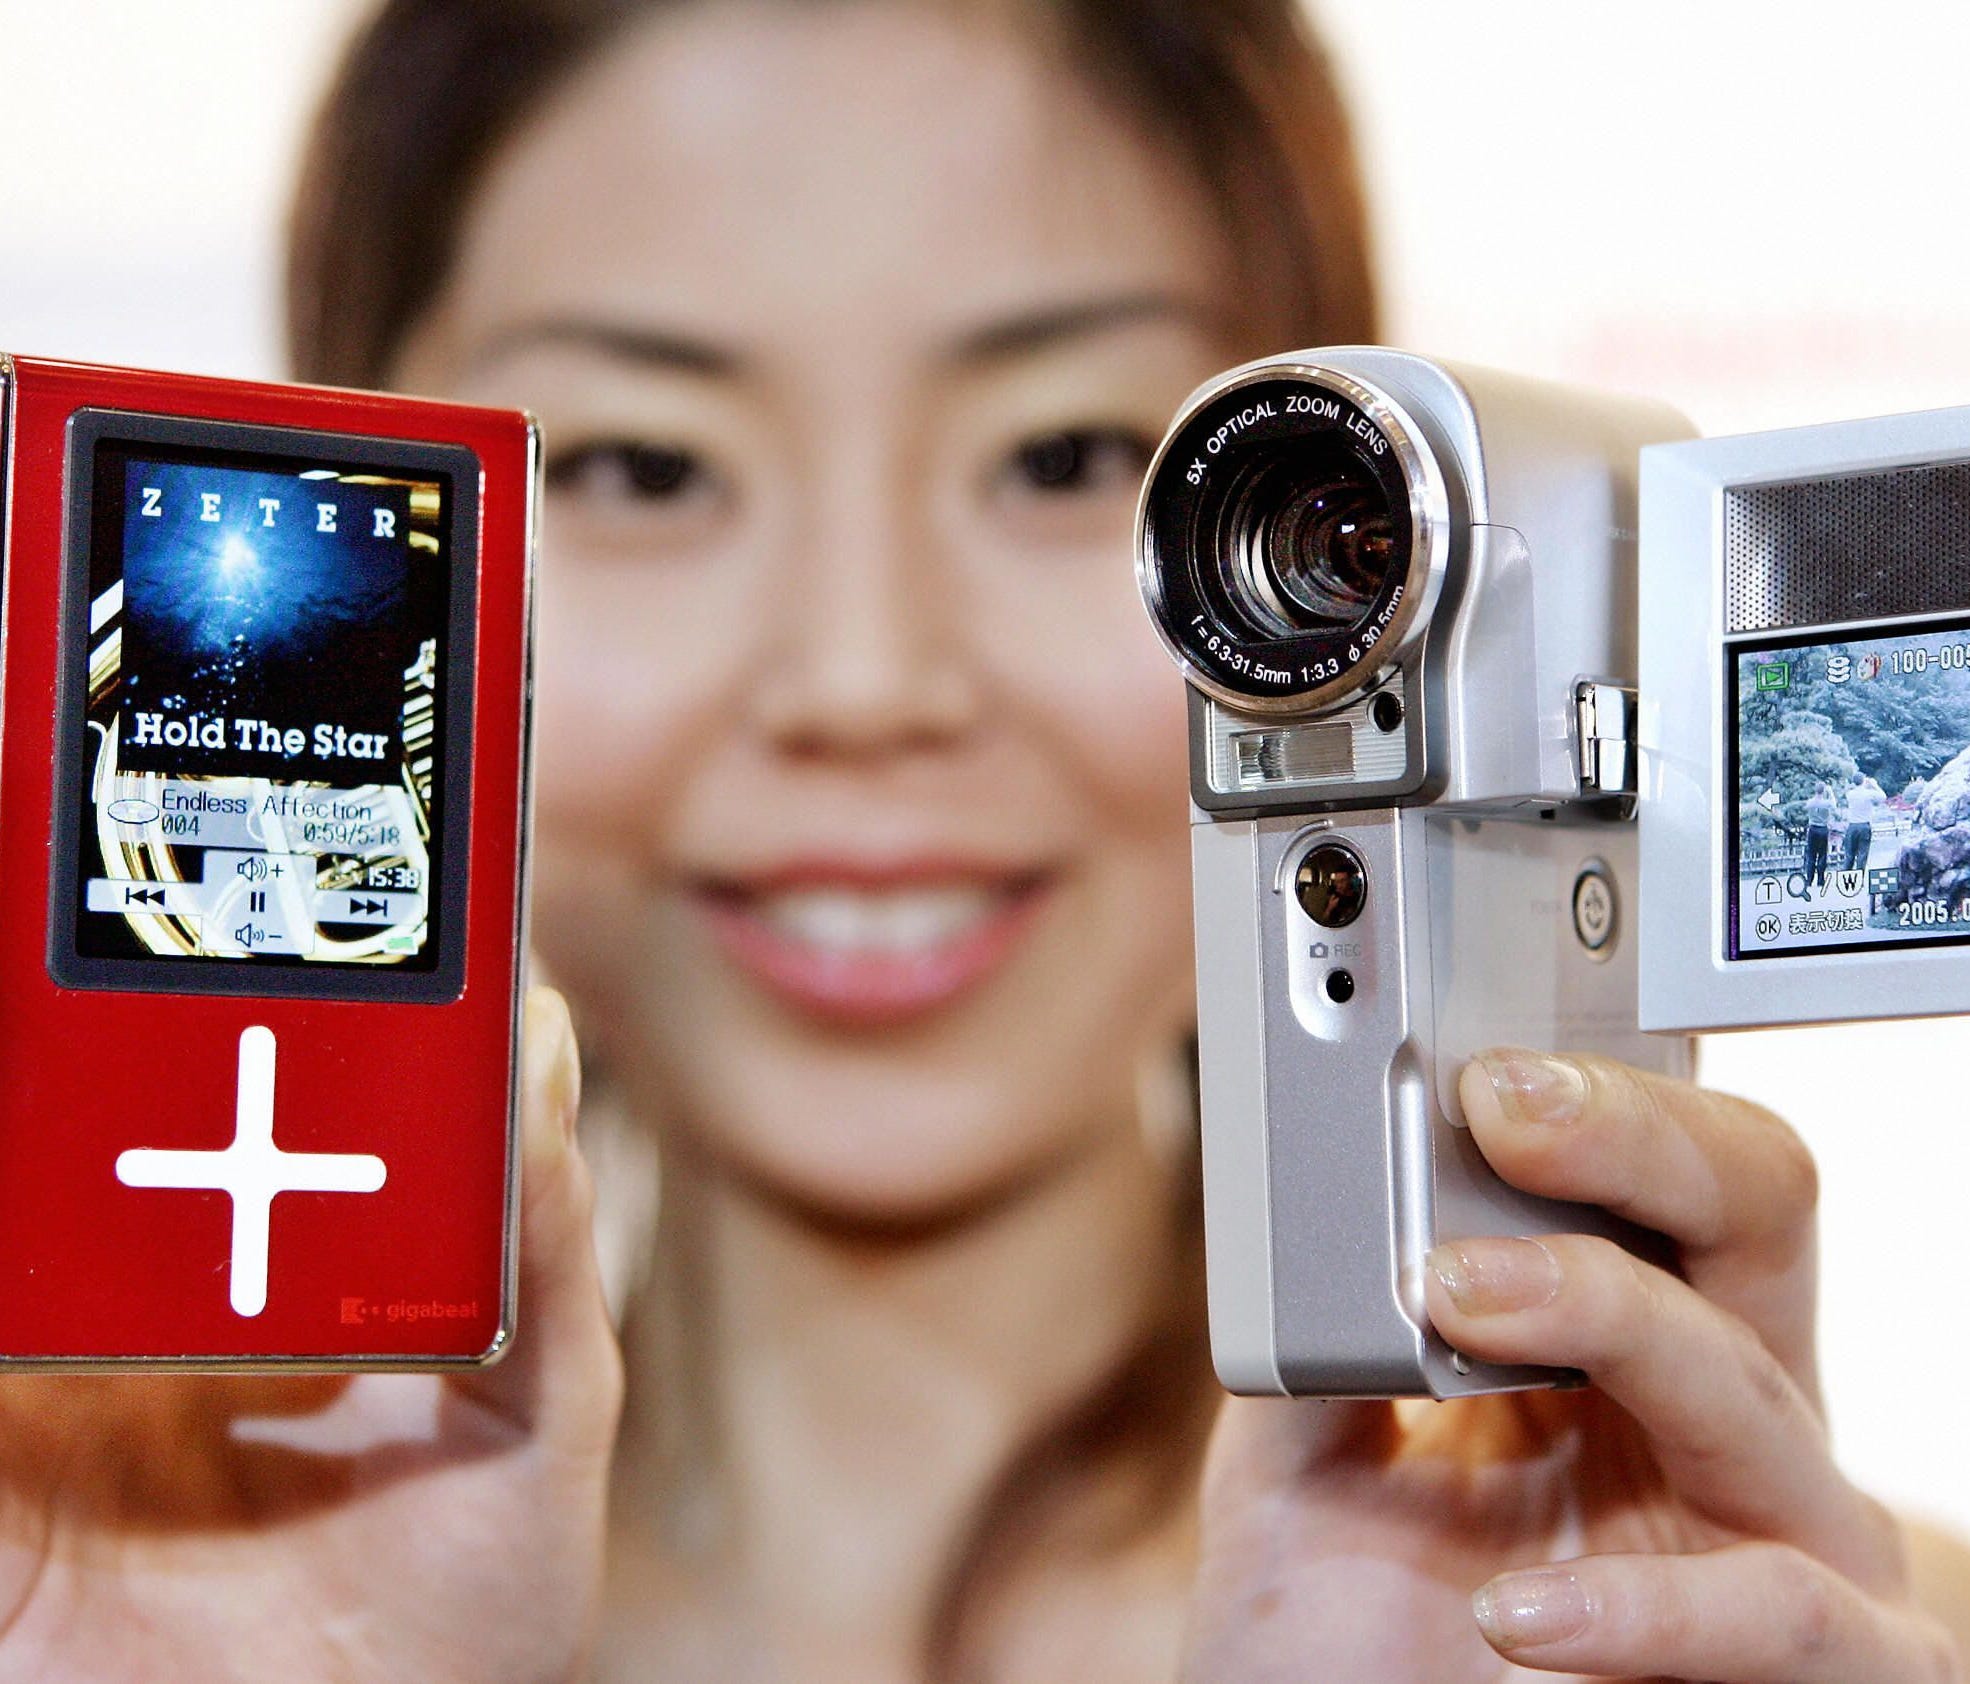 In this 2005 photo, a woman holds Toshiba's  hard disk camcorder Gigashot V10 and a hard disk audio player Gigabeat X30.